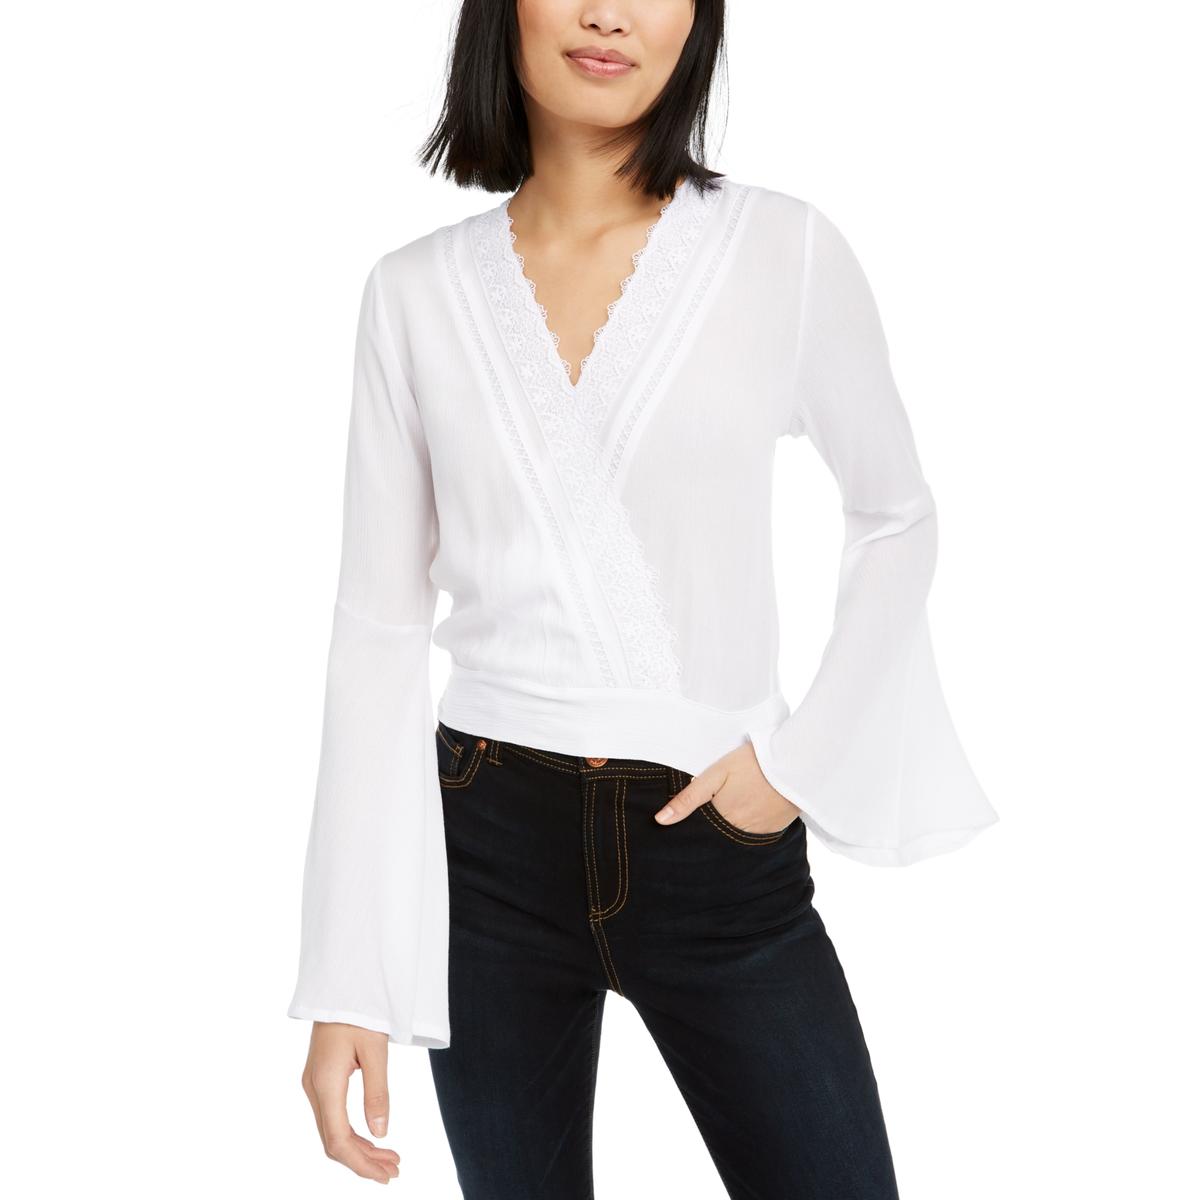 Polly & Esther Womens White Surplice Back Tie Blouse Top Juniors S BHFO ...